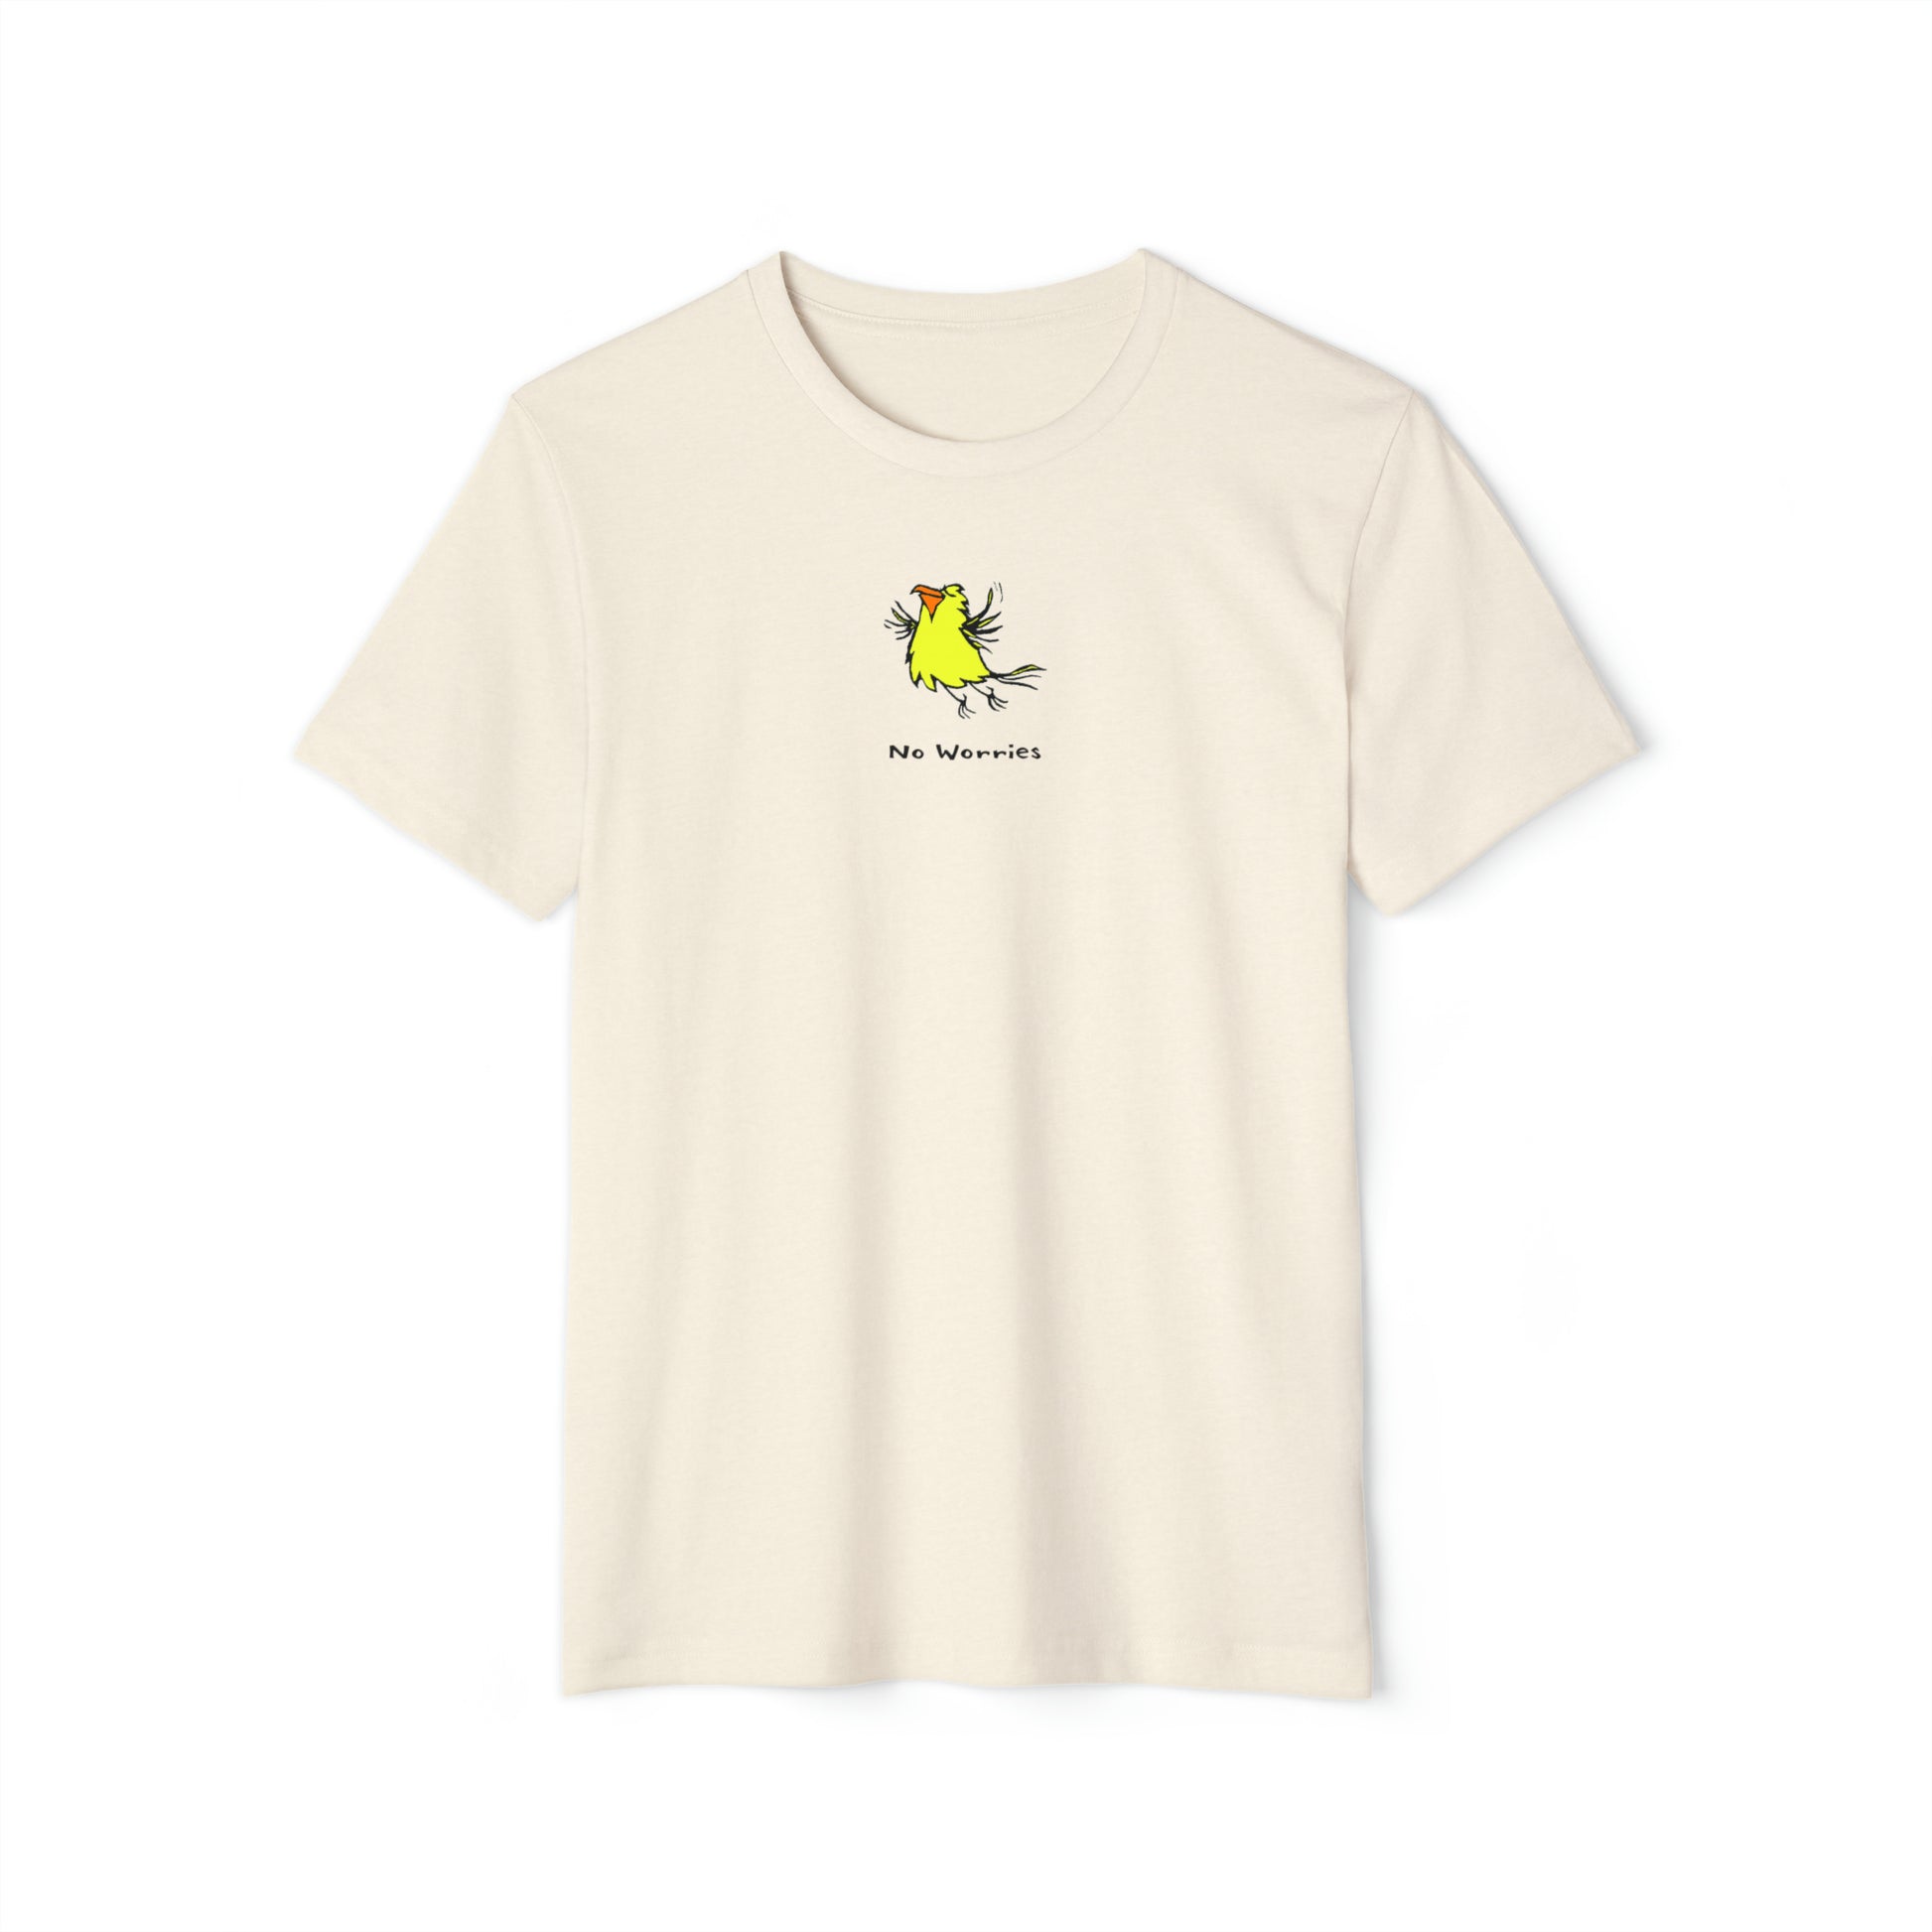 Yellow flying bird with orange beak on heather natural off-white color unisex men's t-shirt. Text under image says No Worries